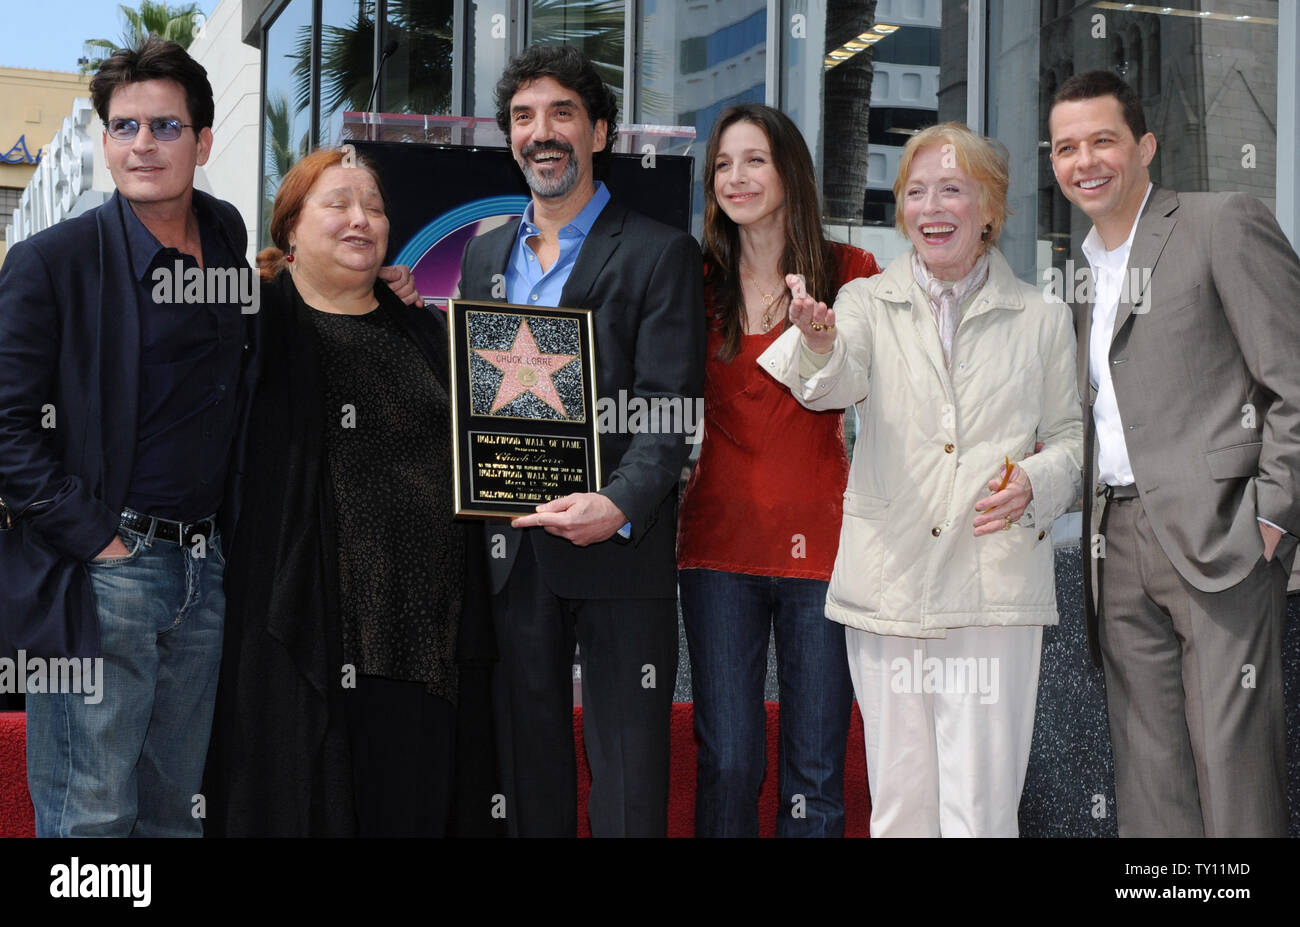 Charlie Sheen, Conchata Ferrell, Chuck Lorre, Marin Hinkle, Holland Taylor and Jon Cryer (L-R), share a light moment during ceremonies honoring Lorre with the 2,380th star on the Hollywood Walk of Fame in Los Angeles on March 12, 2009. Lorre produces and co-created CBS' 'The Big Bang Theory' and 'Two and Half Men'. He also produced 'Dharma & Greg'' and 'Grace Under Fire'. (UPI Photo/Jim Ruymen) Stock Photo